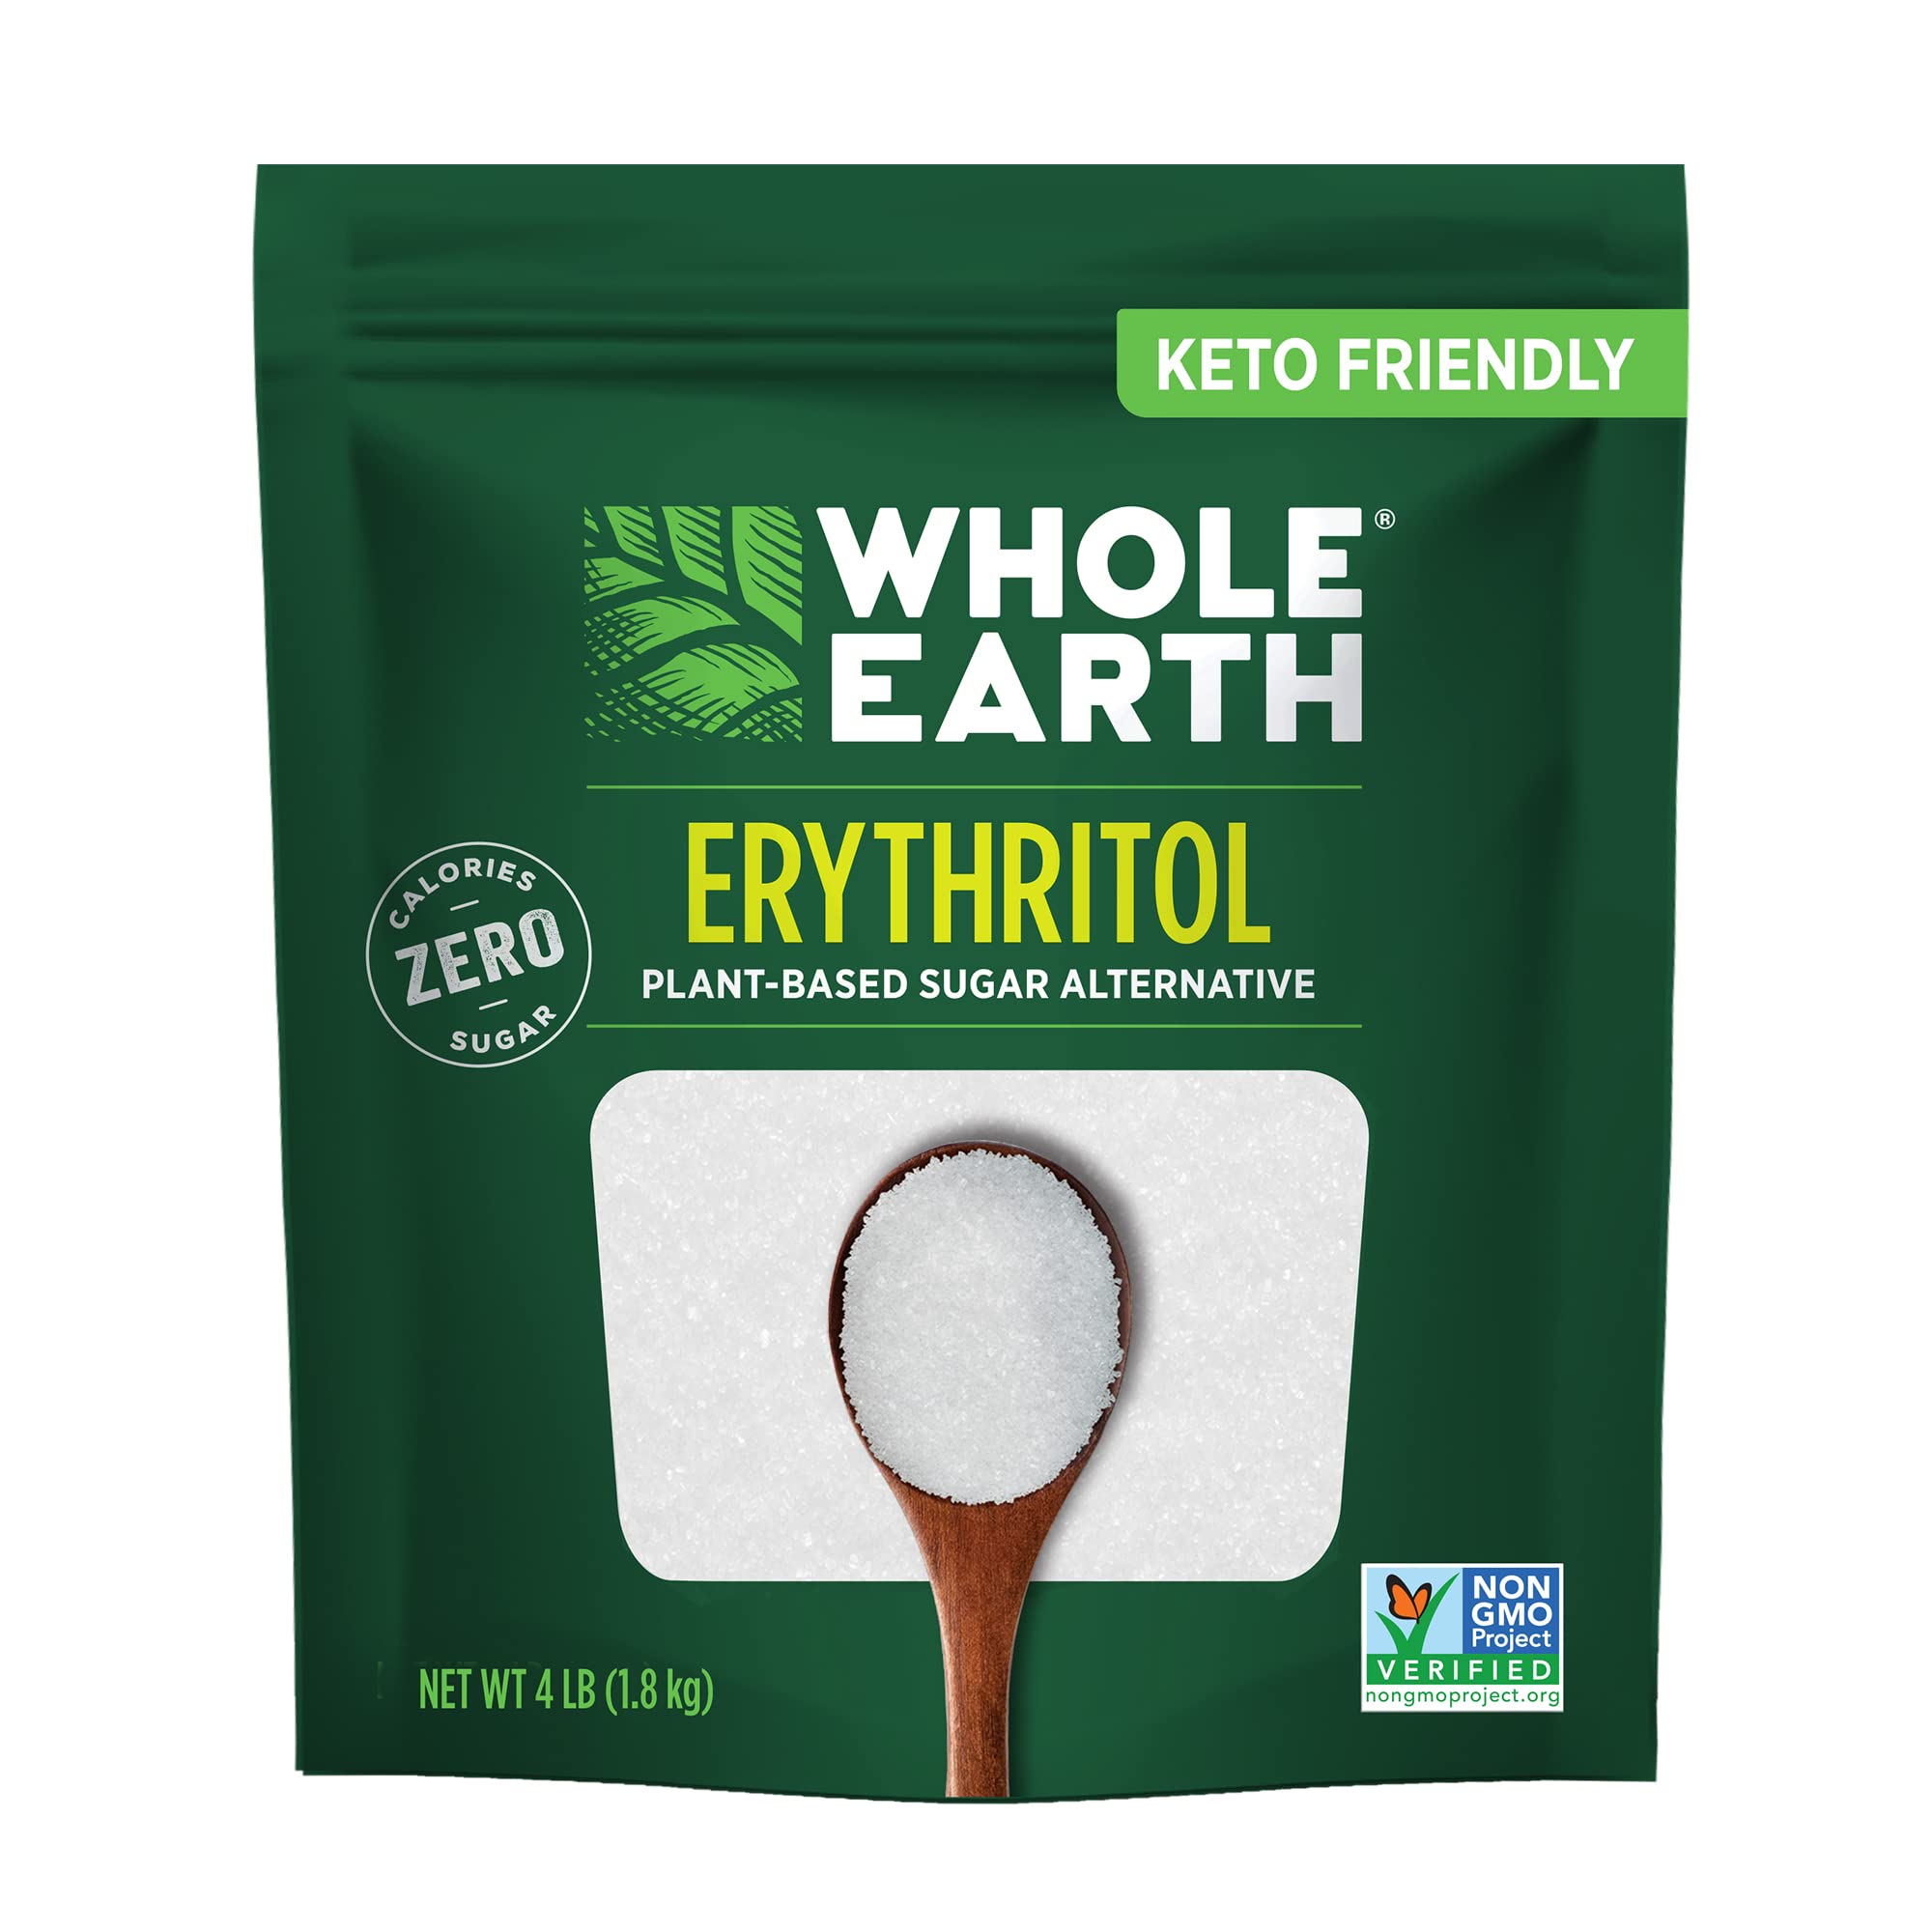 4 LB WHOLE EARTH 100% Erythritol Zero Calorie Plant-Based Sugar Alternative $13.58 after 15% S&S